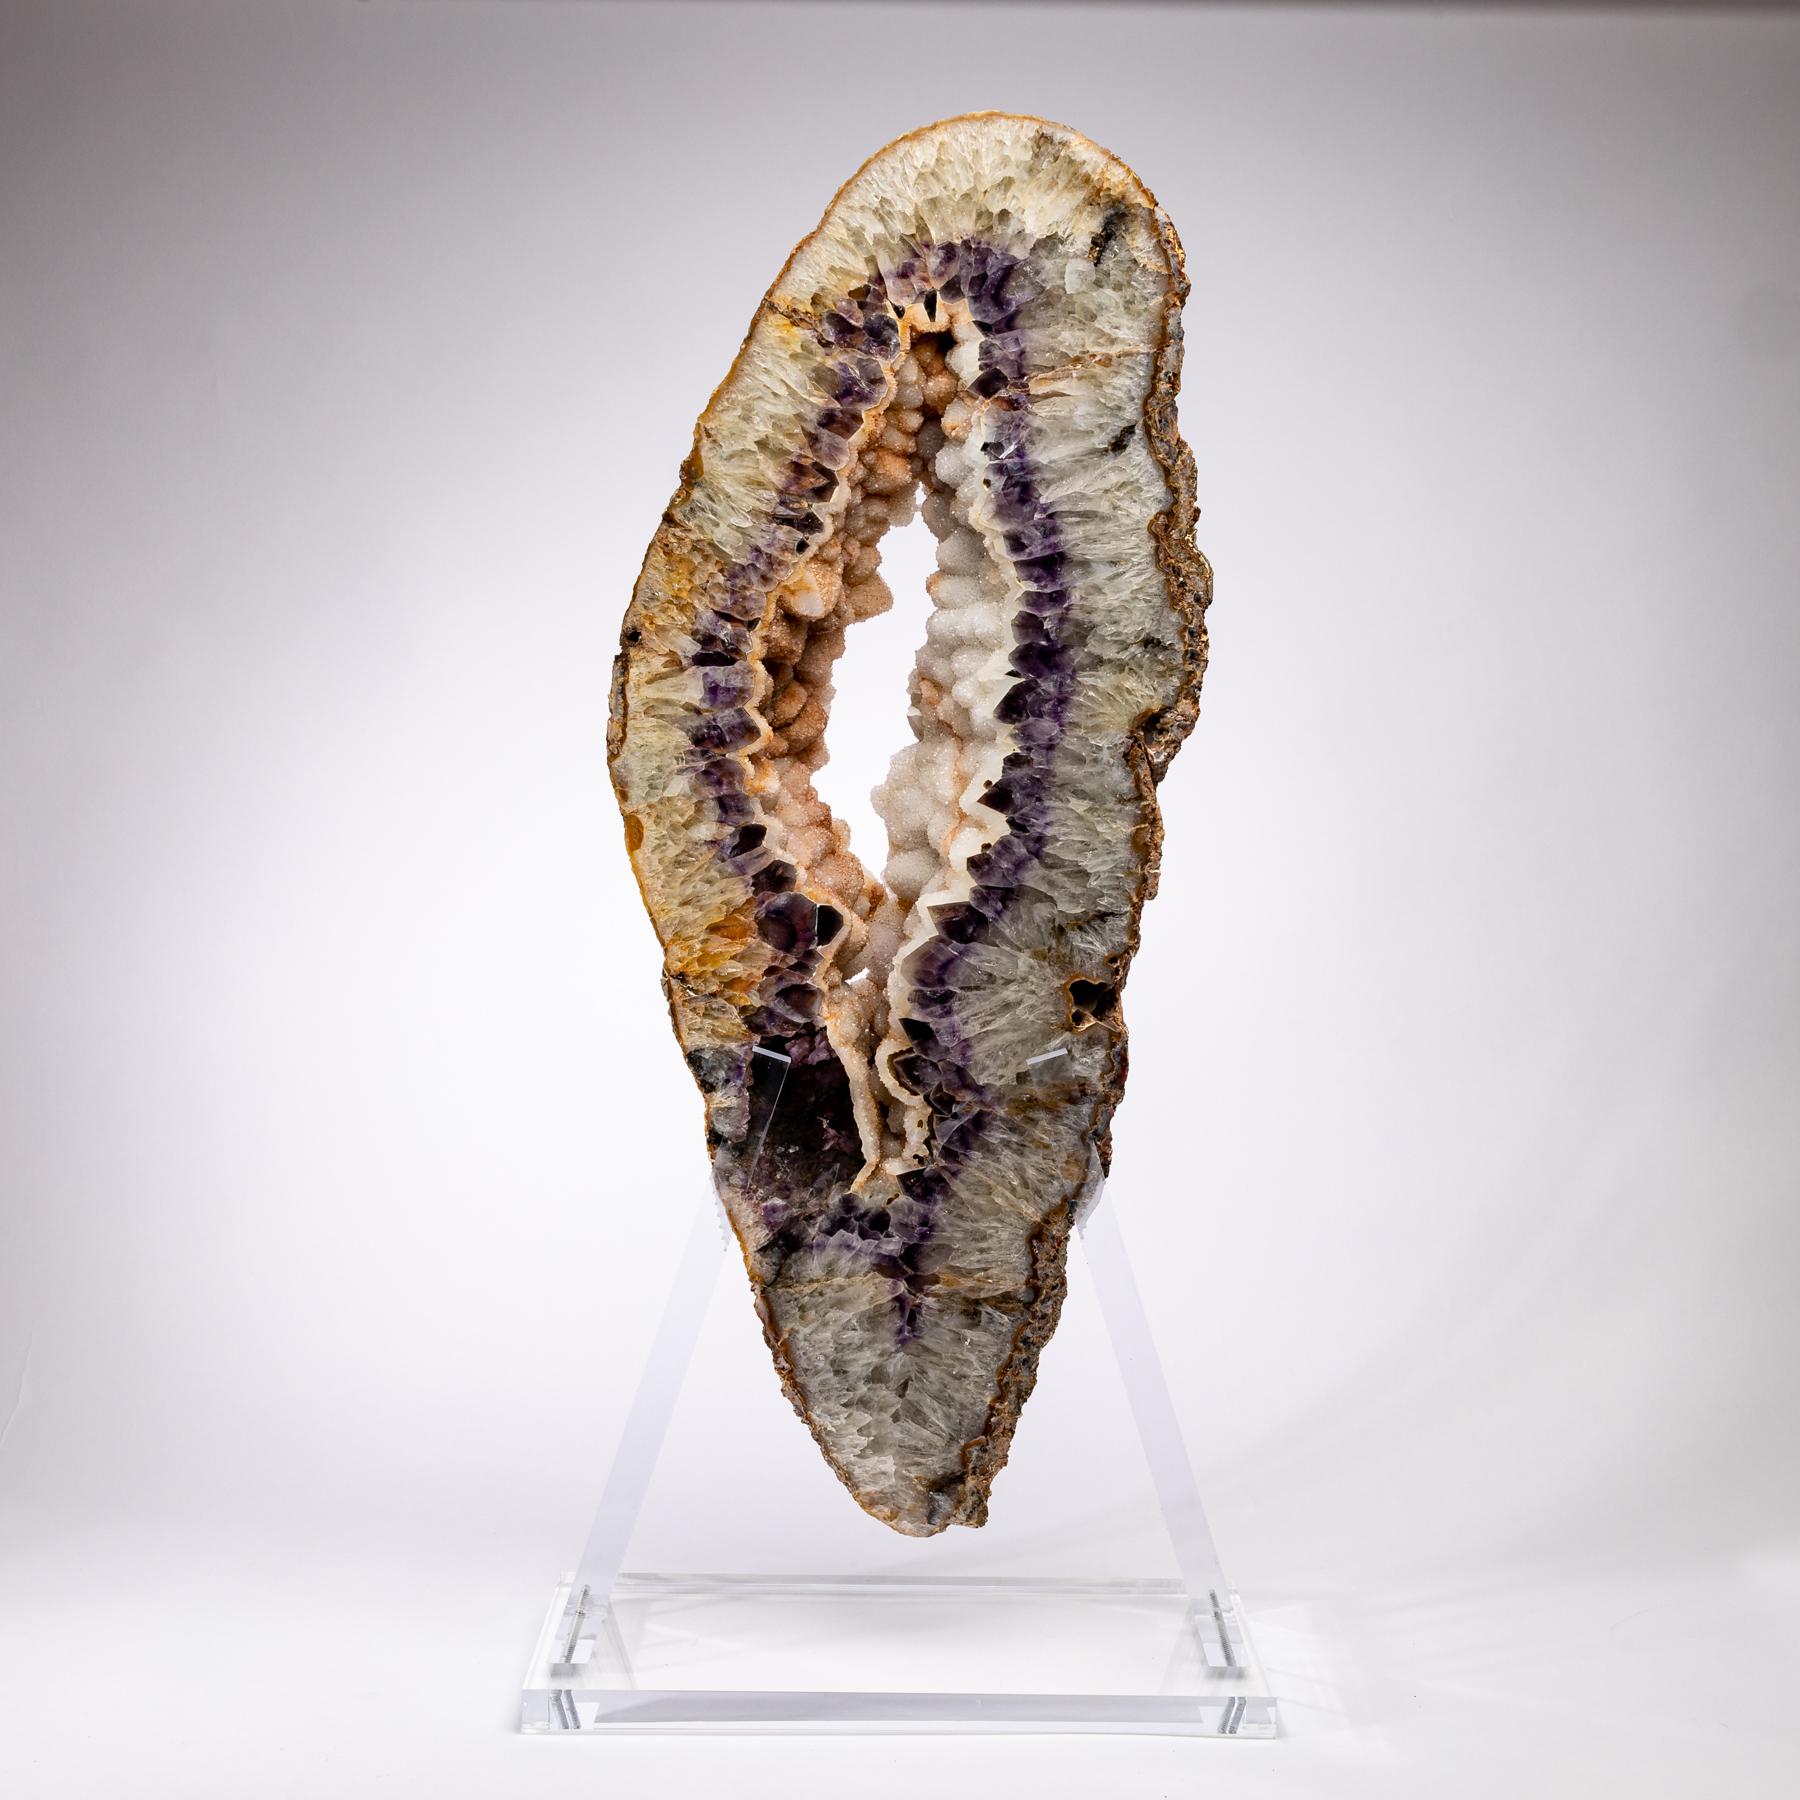 This amethyst/ agate slab is from Brazil and has a combination of colors with hints of purple, white, grey and brown.
Agates are formed in rounded nodules, which are sliced open to bring out the internal pattern hidden in the stone. Their formation